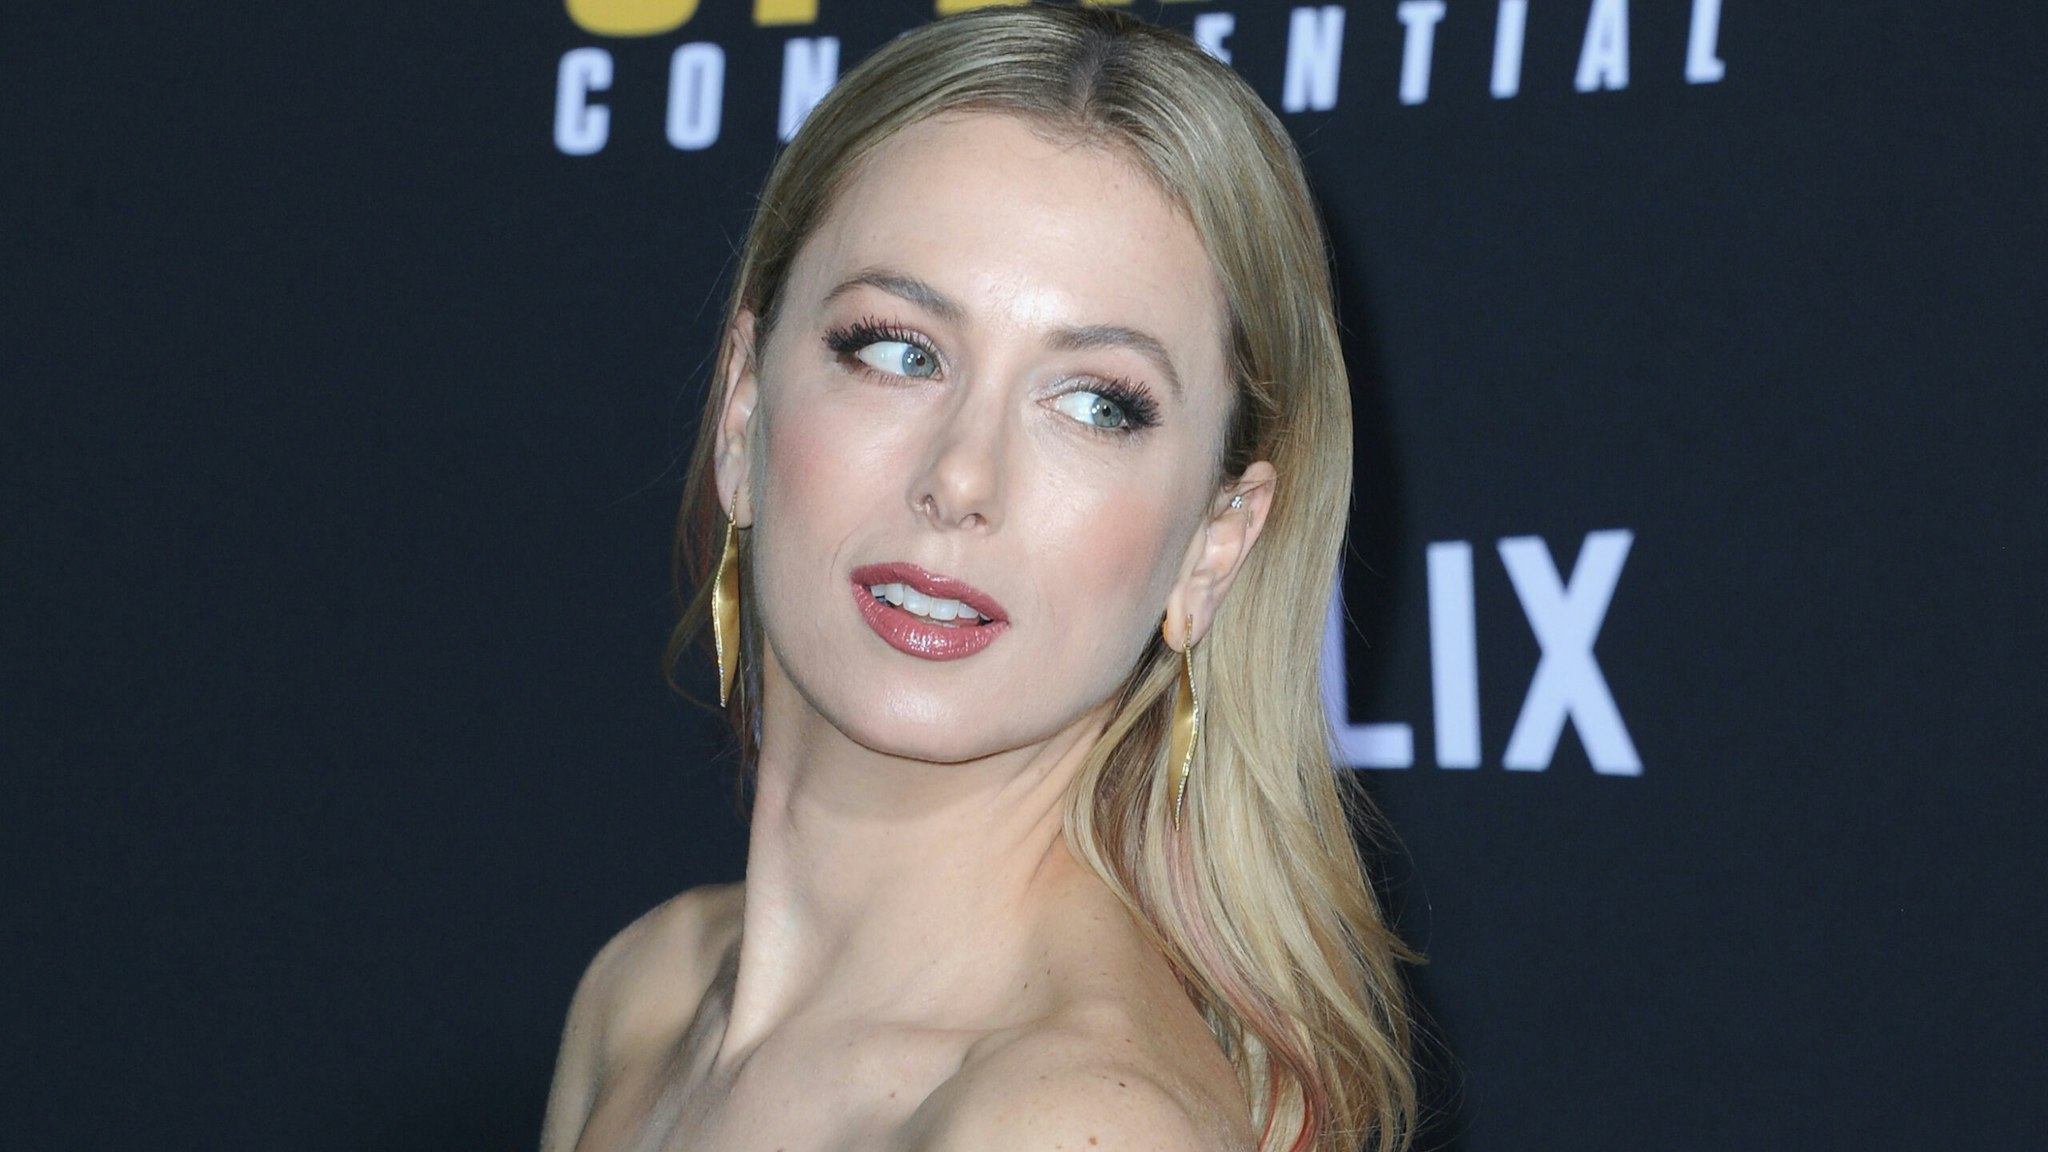 Iliza Shlesinger arrives for the Premiere Of Netflix's "Spenser Confidential" held at Regency Village Theatre on February 27, 2020 in Westwood, California. (Photo by Albert L. Ortega/Getty Images)